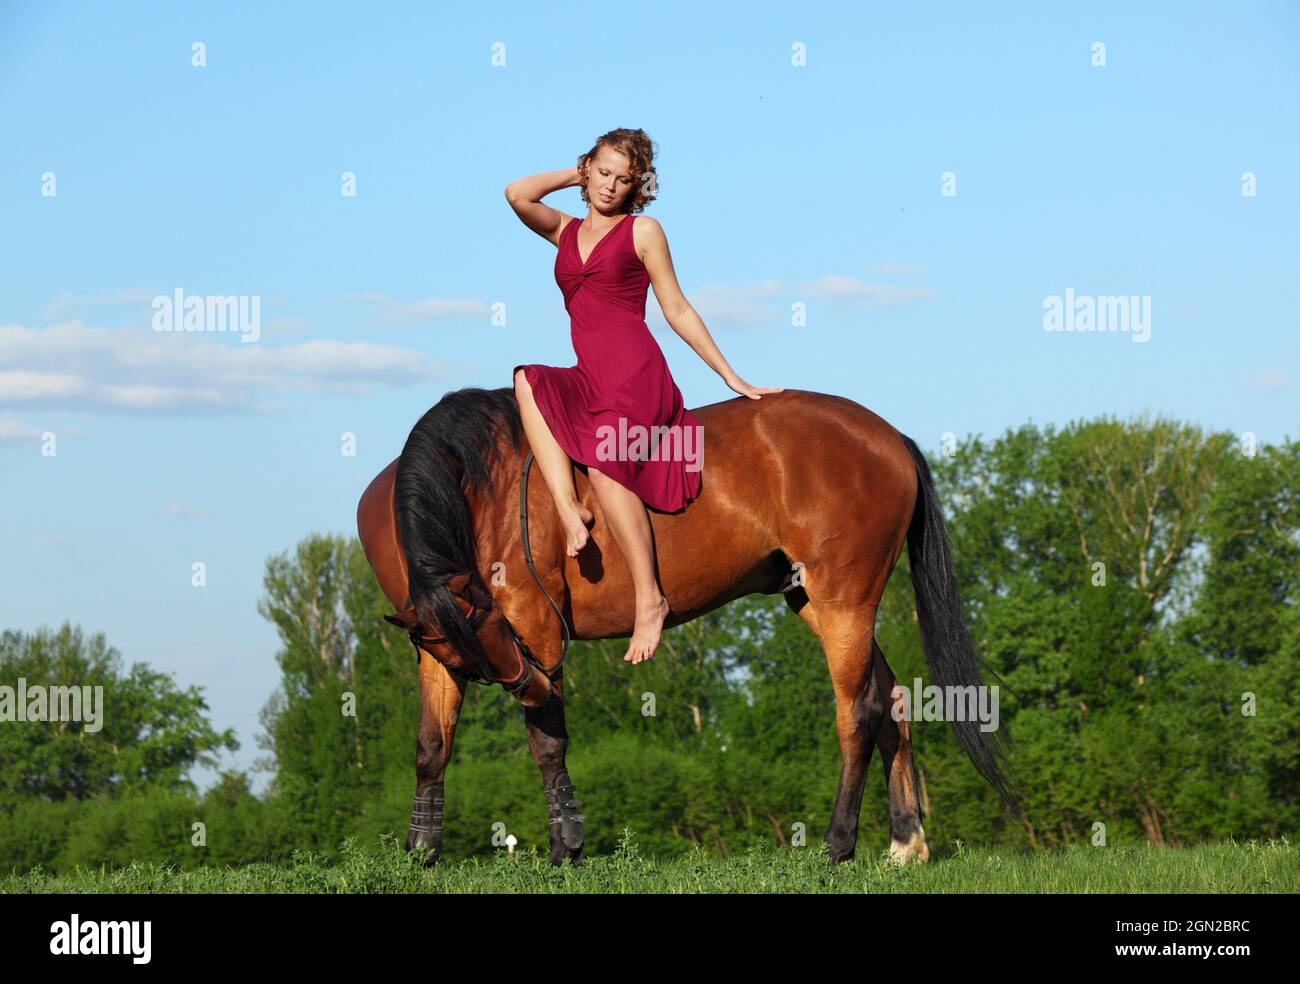 Equestrian woman in the red dress riding horse in summer nature Stock Photo